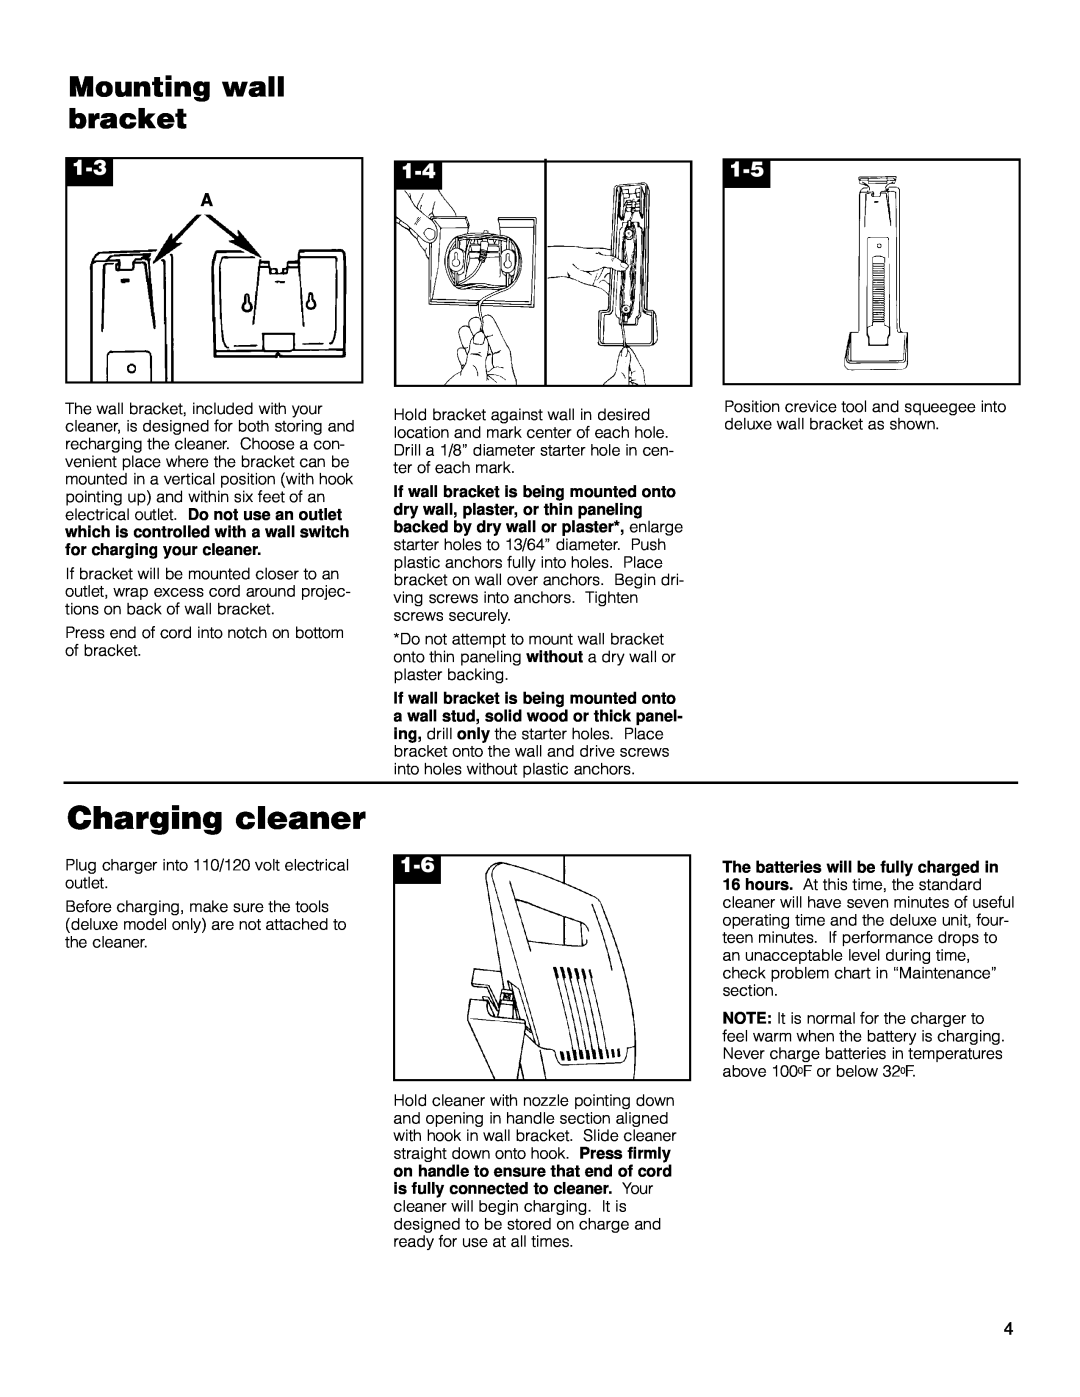 Hoover Dubl-Duty owner manual Charging cleaner, Mounting wall bracket 